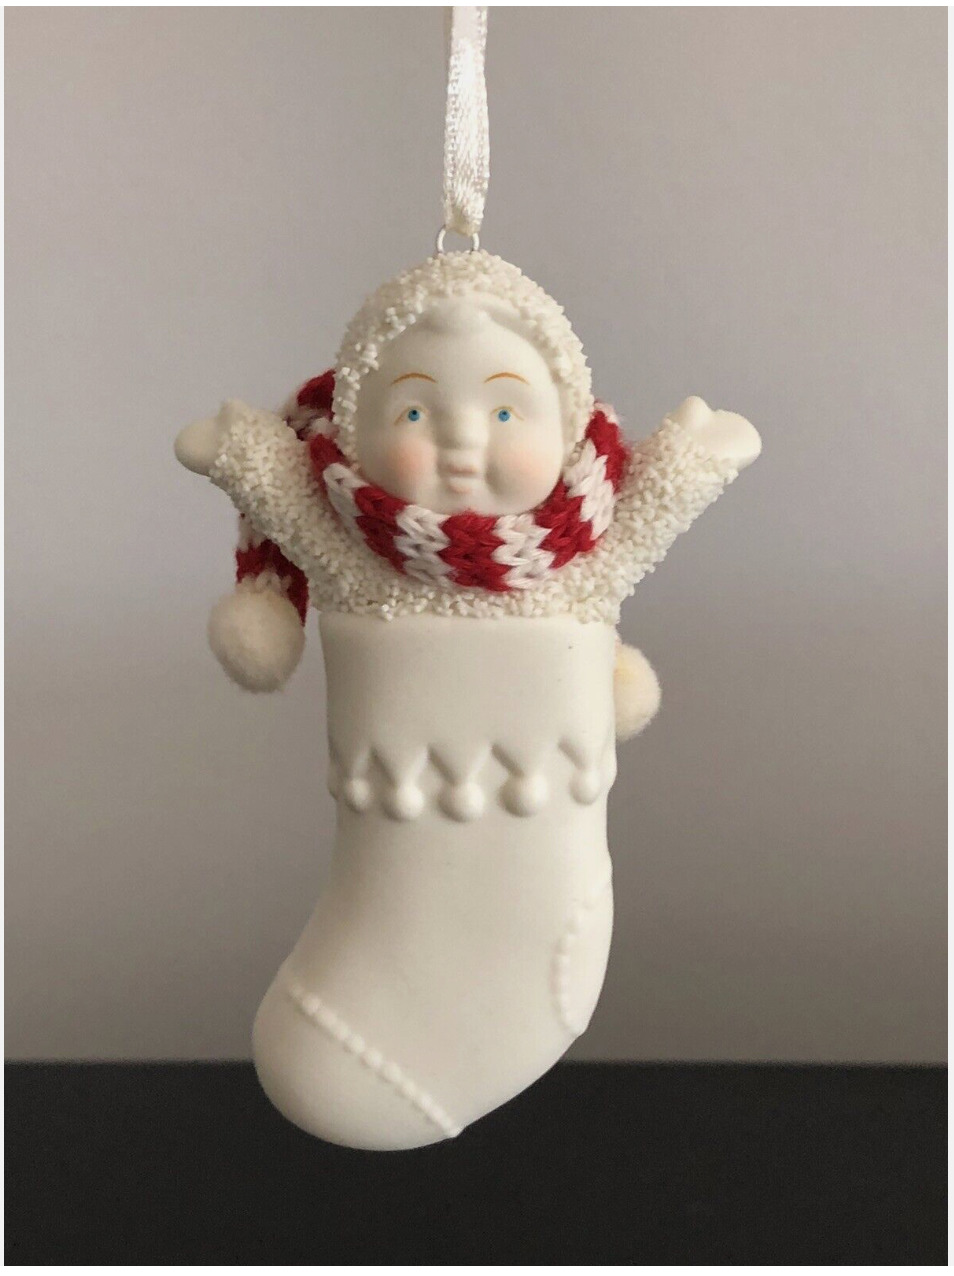 SNOWBABIES Blank Porcelain Stocking Ornament by Department 56 